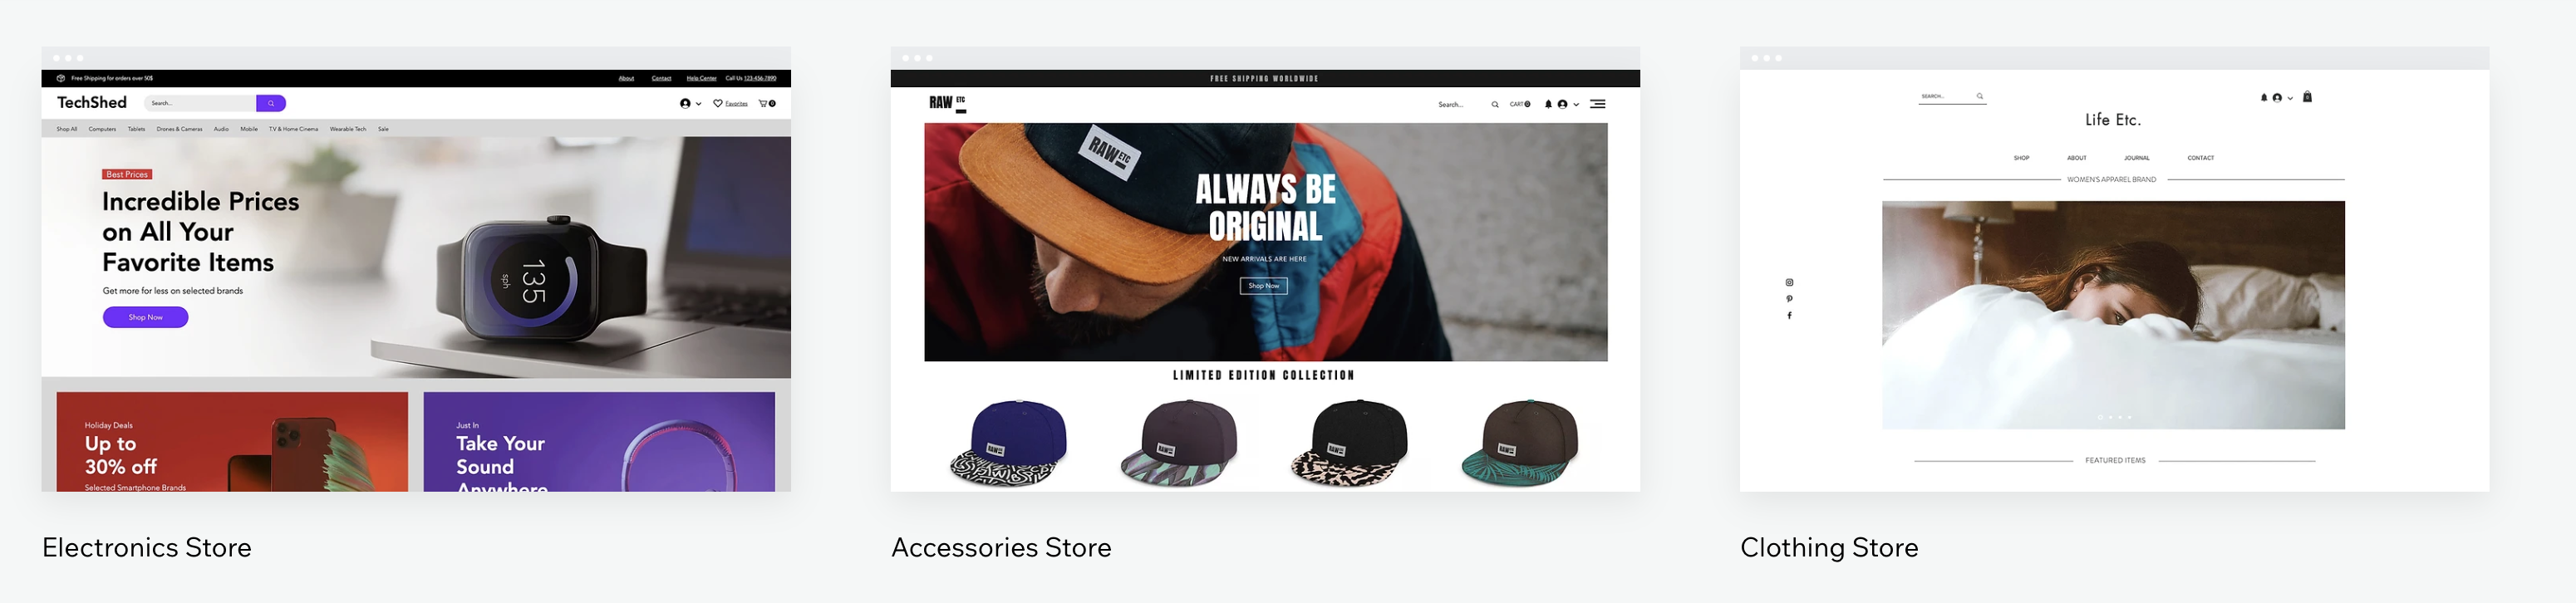 A preview of the eCommerce website templates offered by Wix.